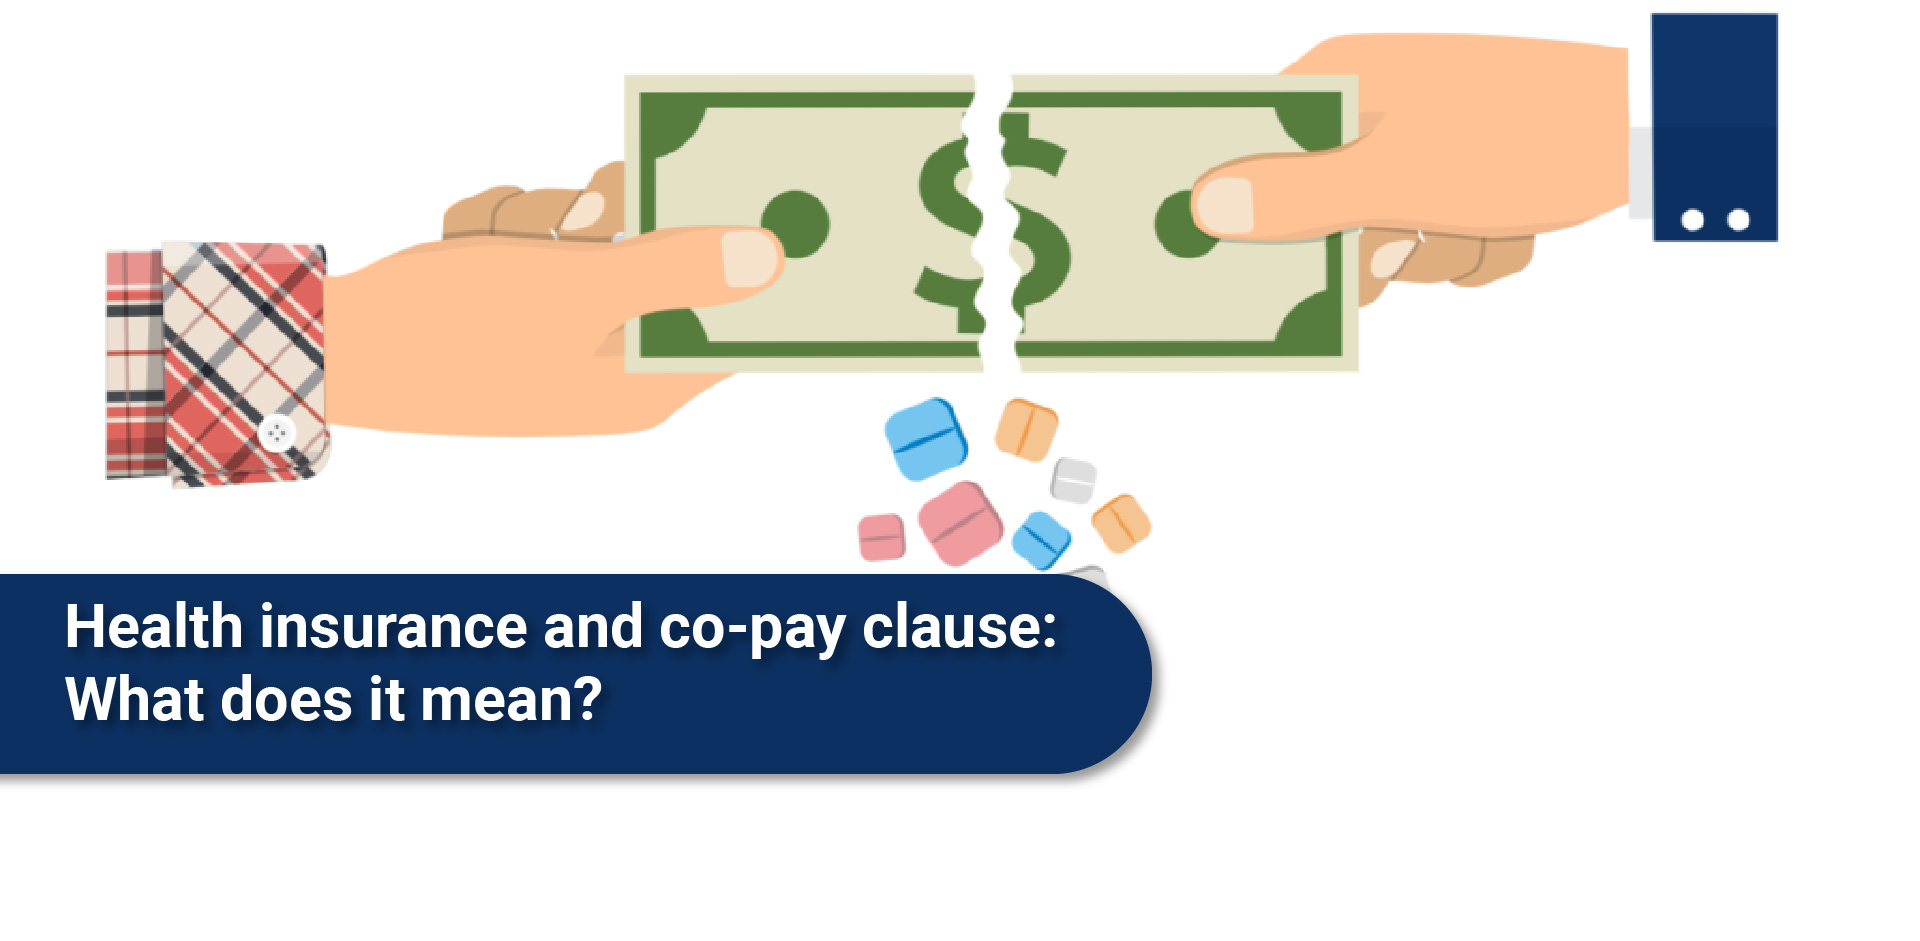 Health insurance and co-pay clause: What does it mean?